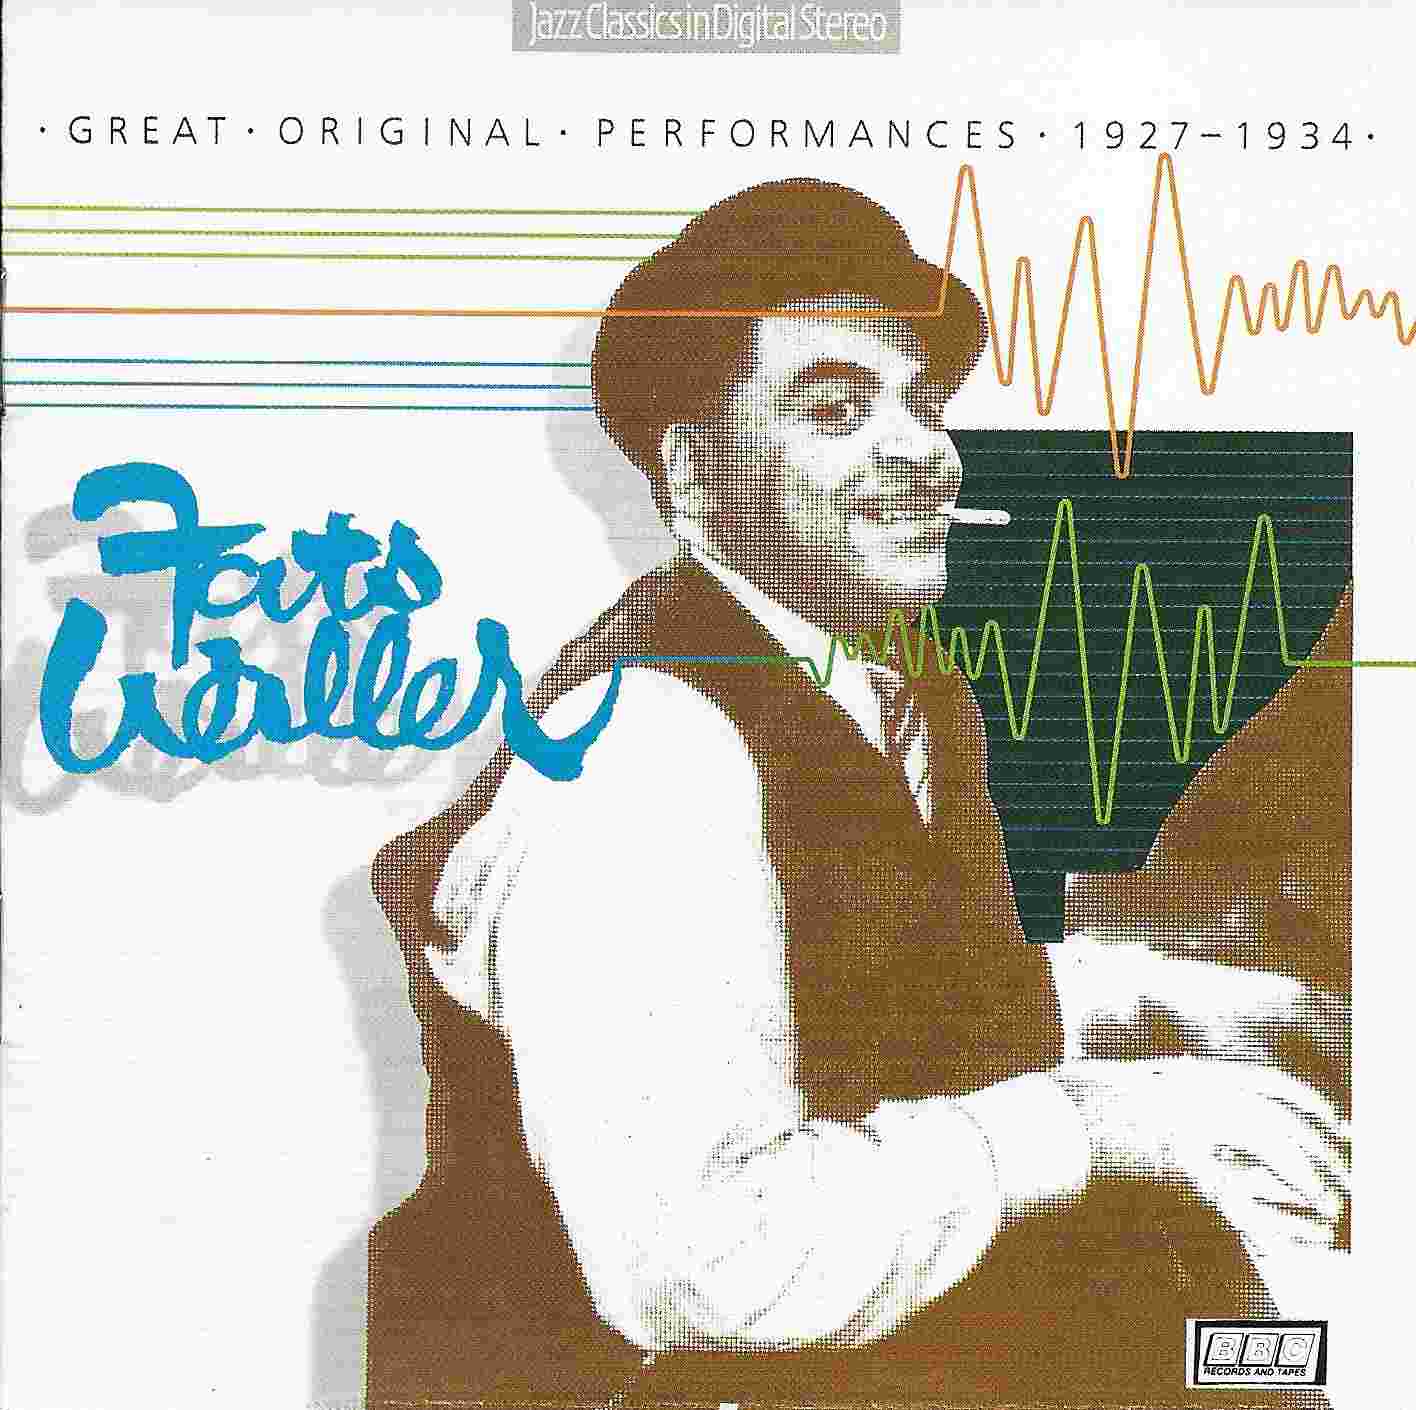 Picture of Jazz Classics - Fats Waller by artist Fats Waller from the BBC cds - Records and Tapes library